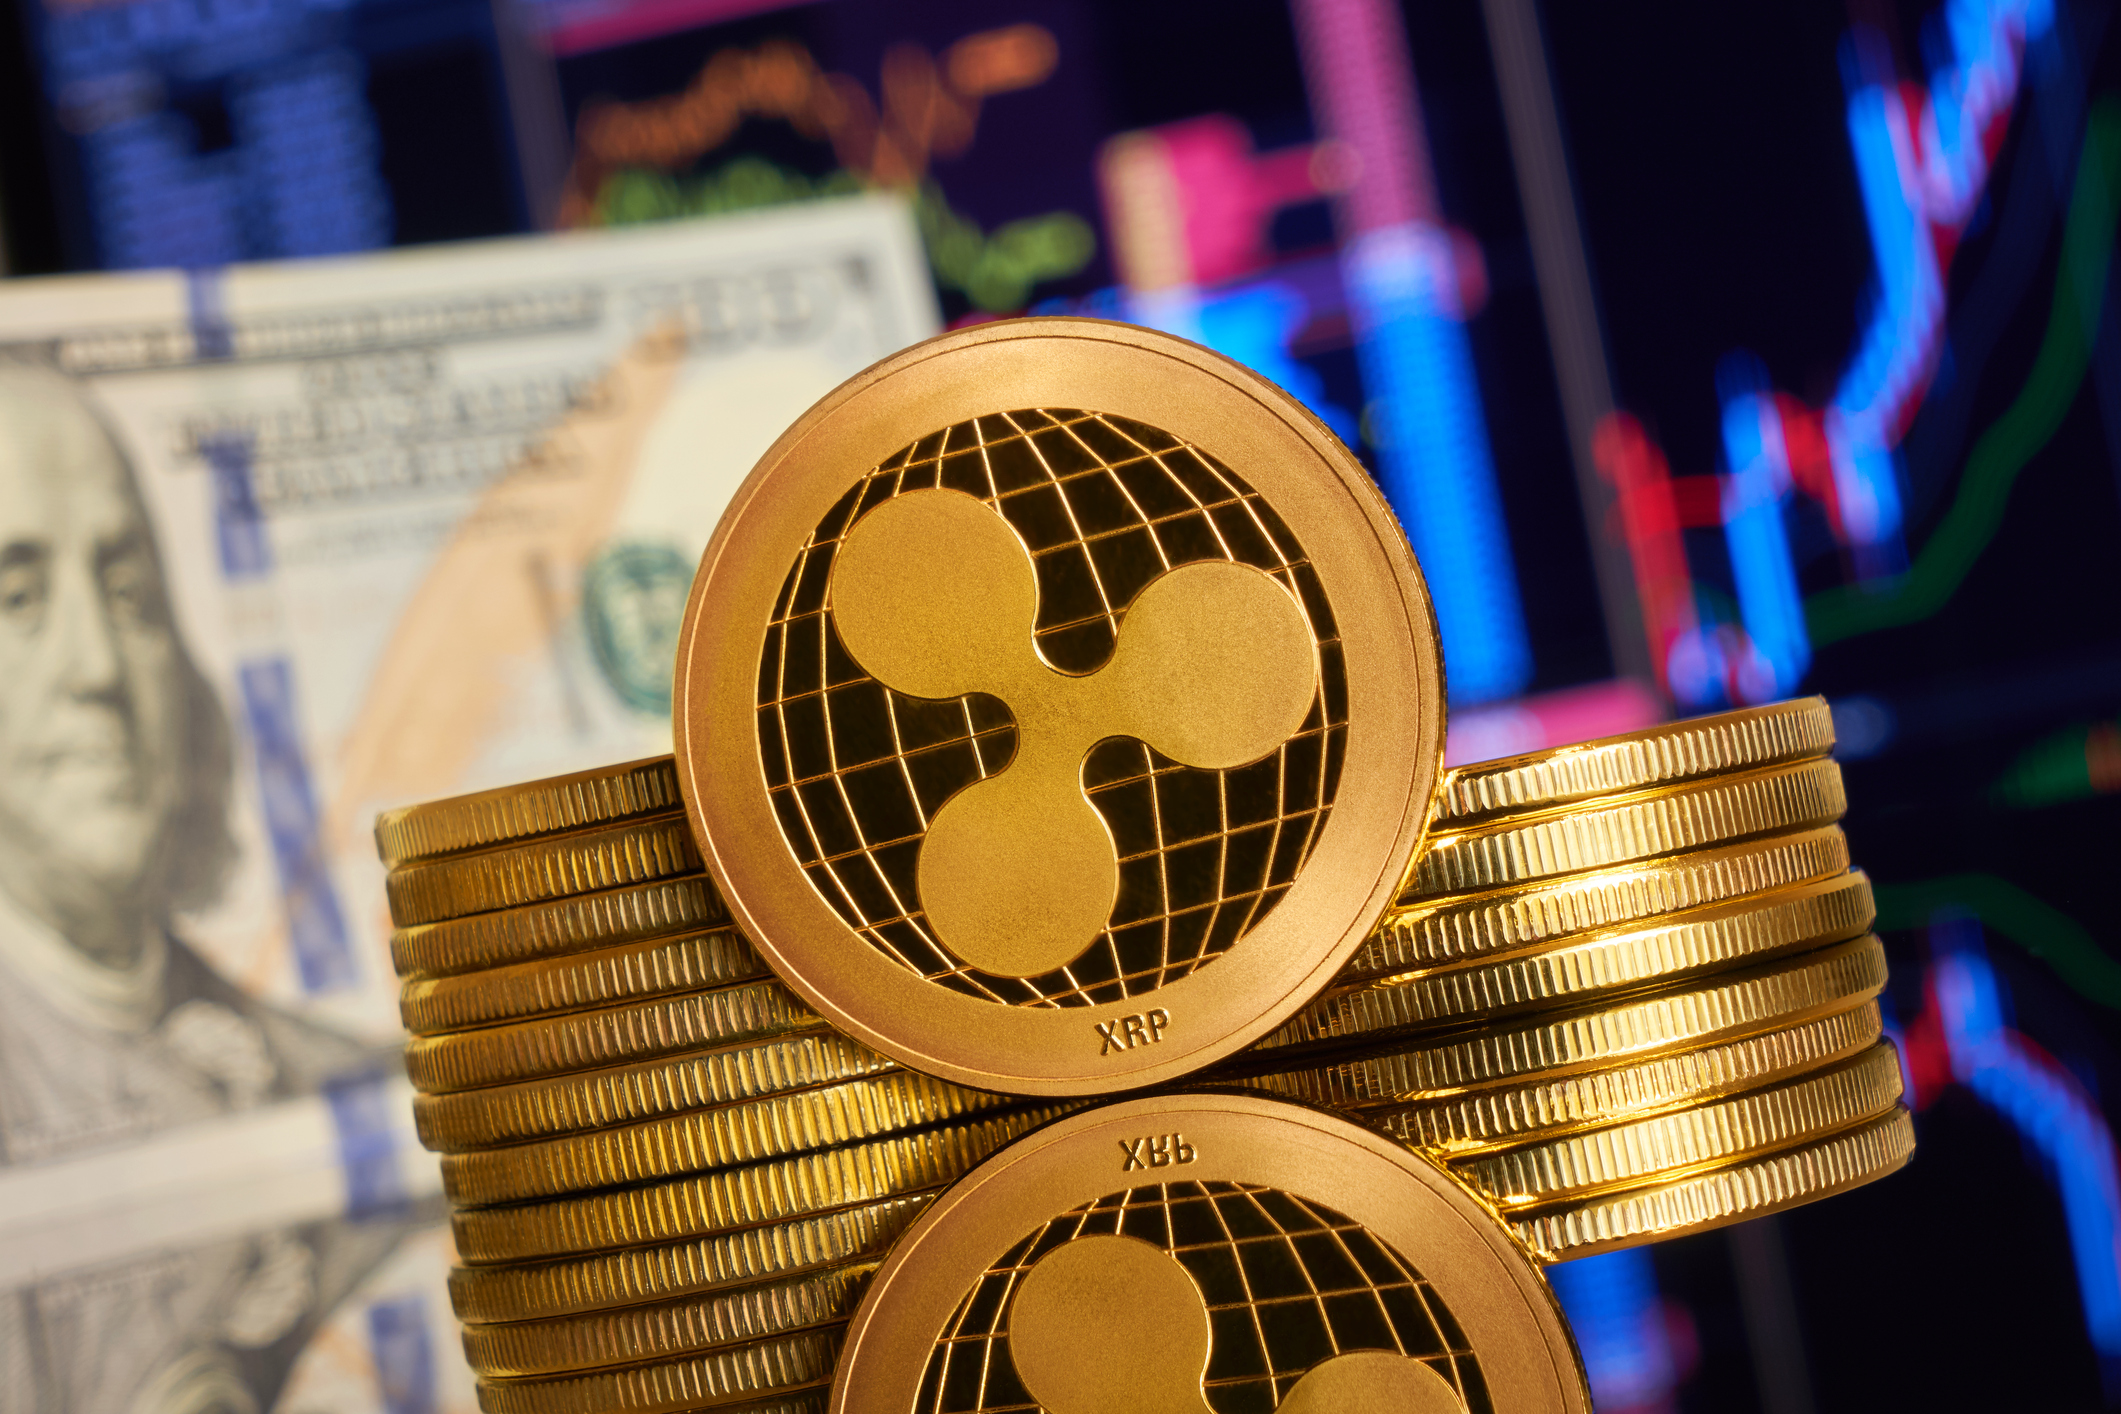 XRP Price Set Theory Debunked By Community, Here’s What It’s About